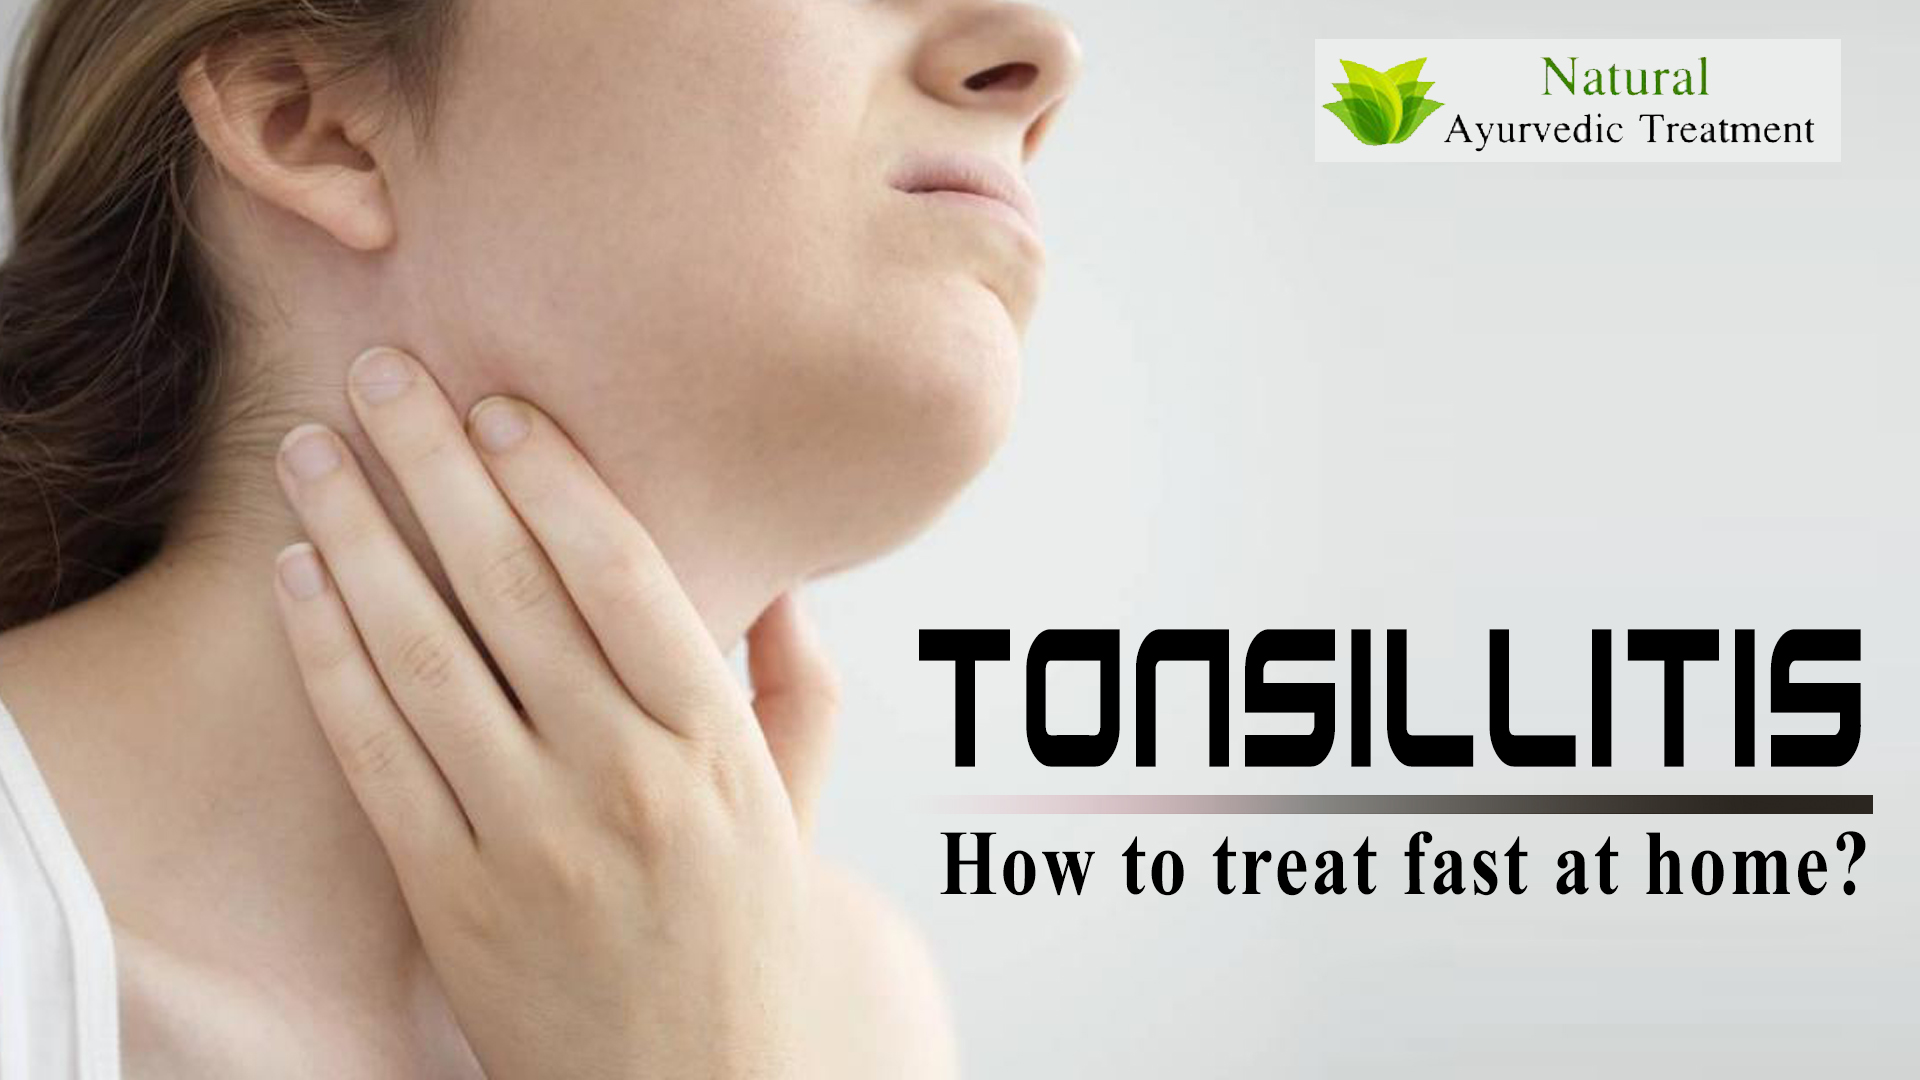 How to Treat Tonsillitis Fast at Home?